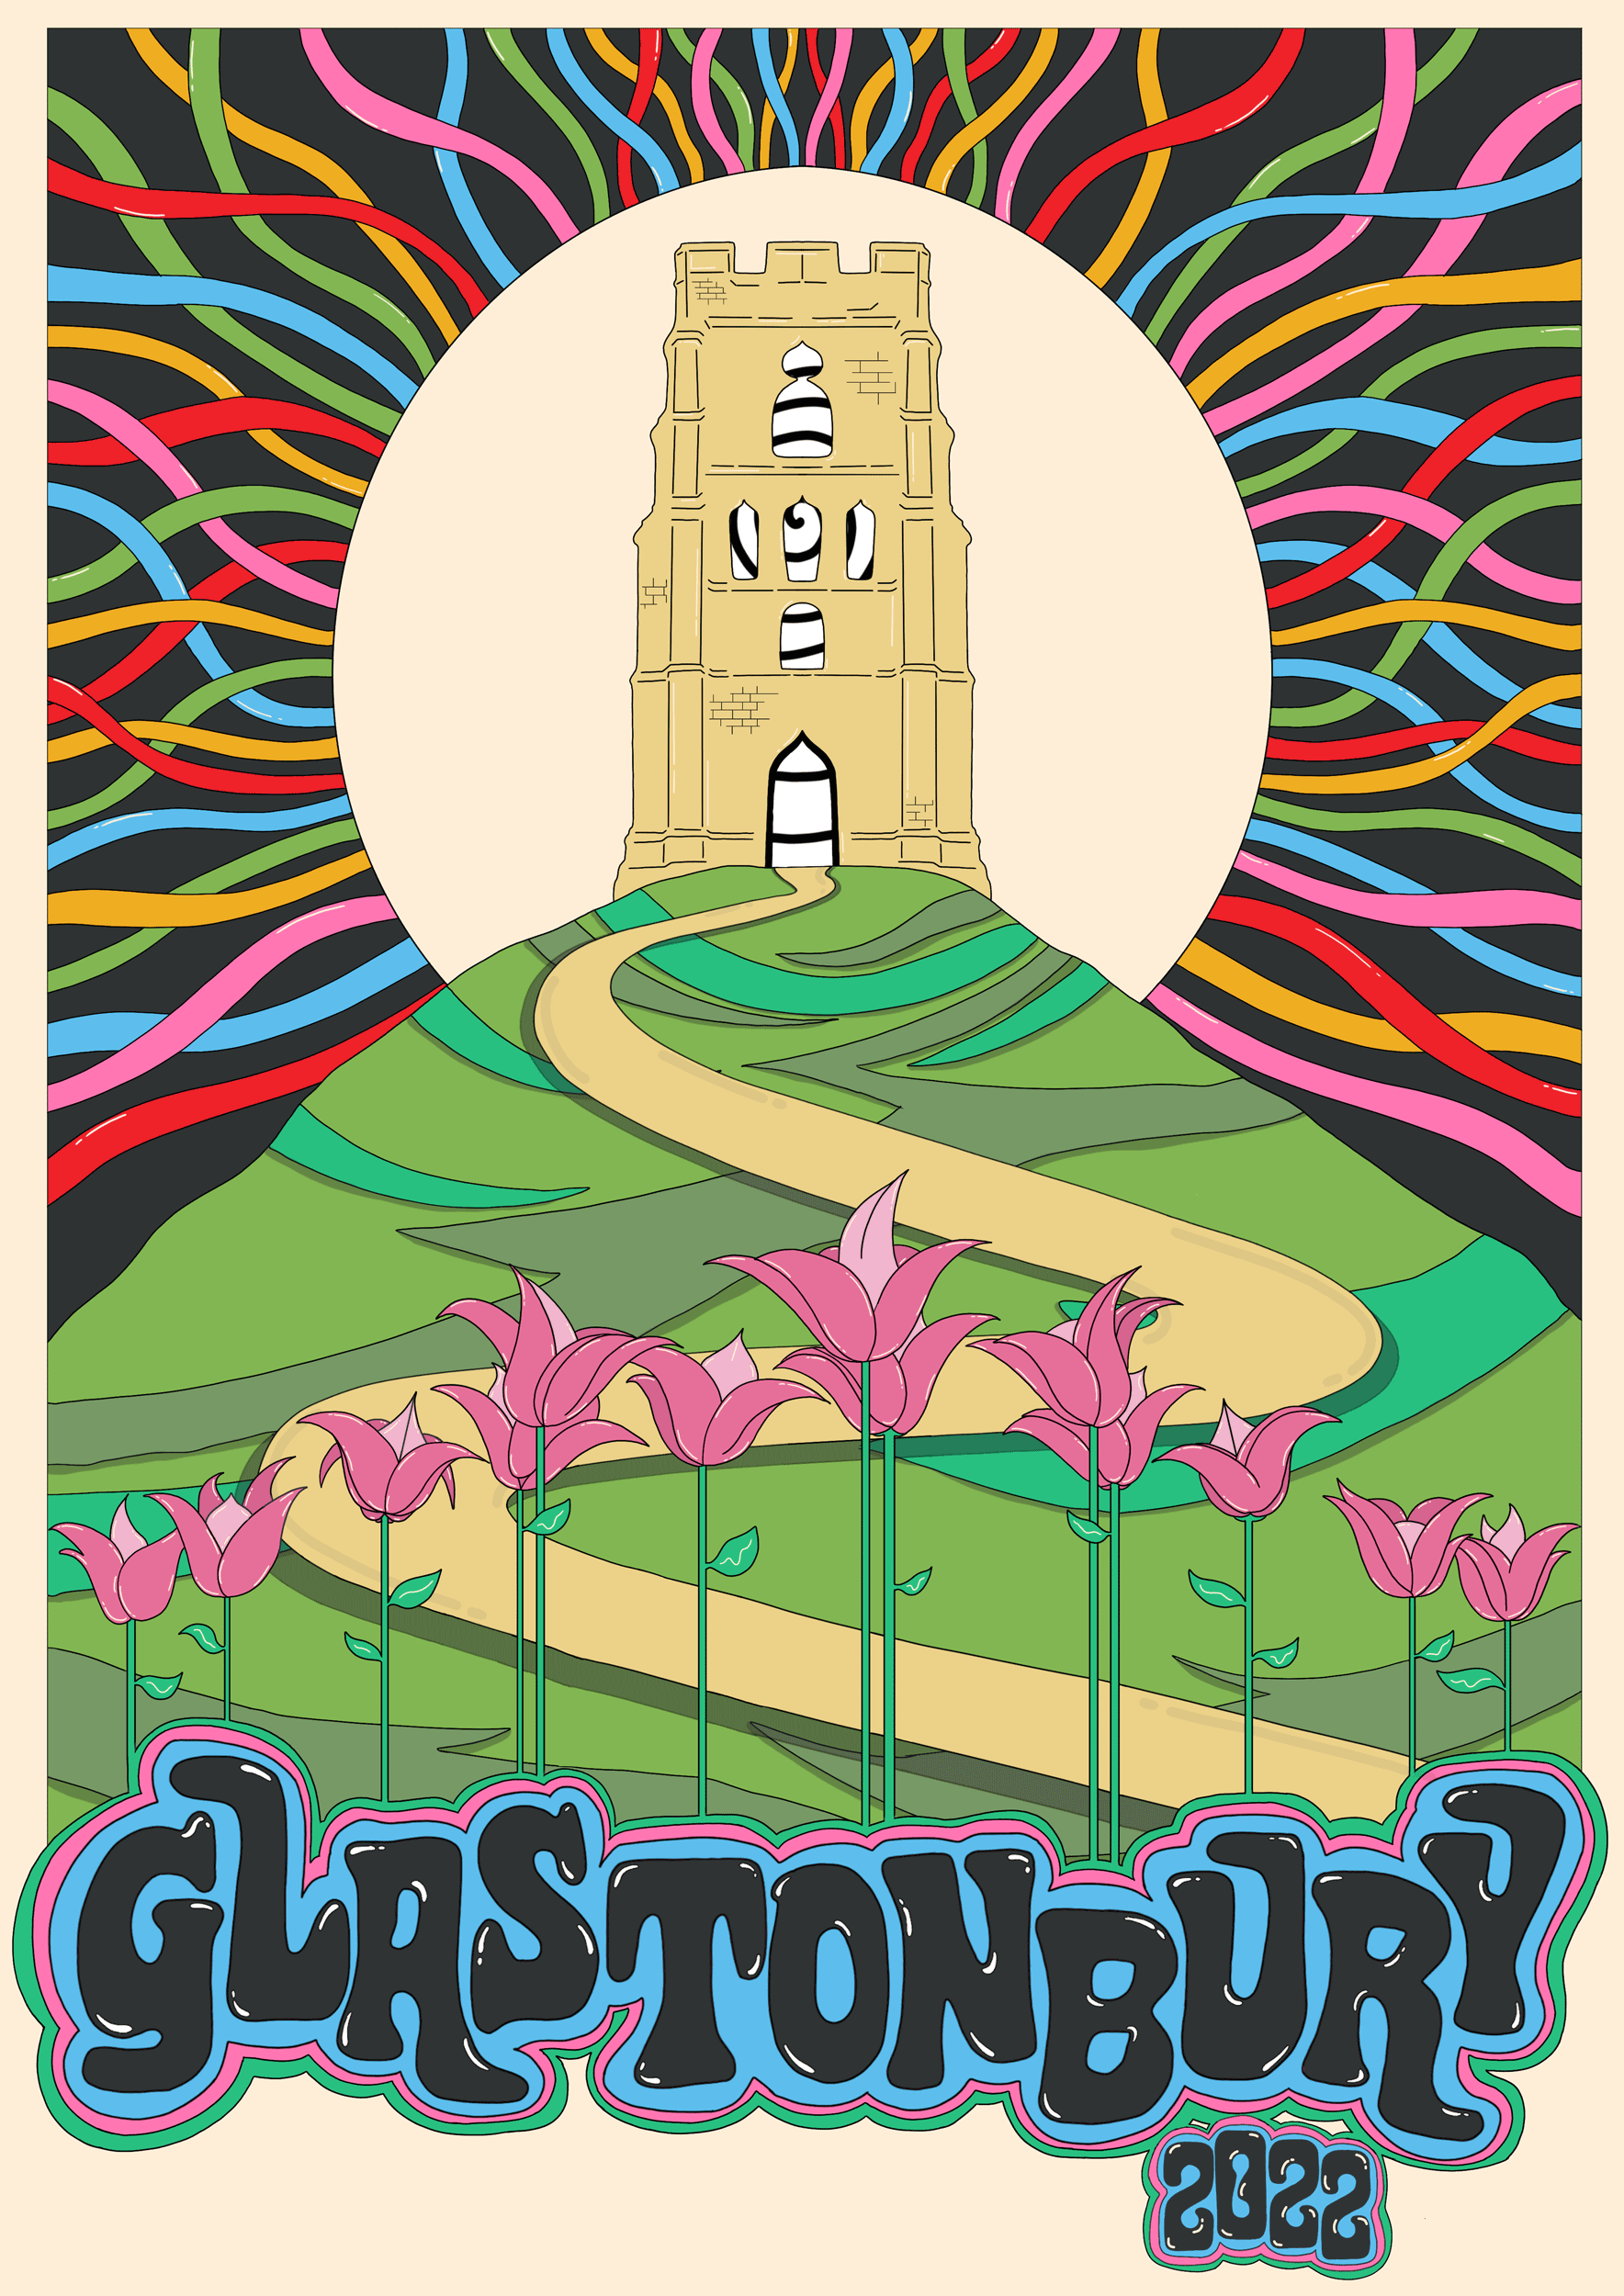 BA Illustration work by Shannon Stewart showing a A2 poster inspired by the spiritual aspects of Glastonbury including the Tor